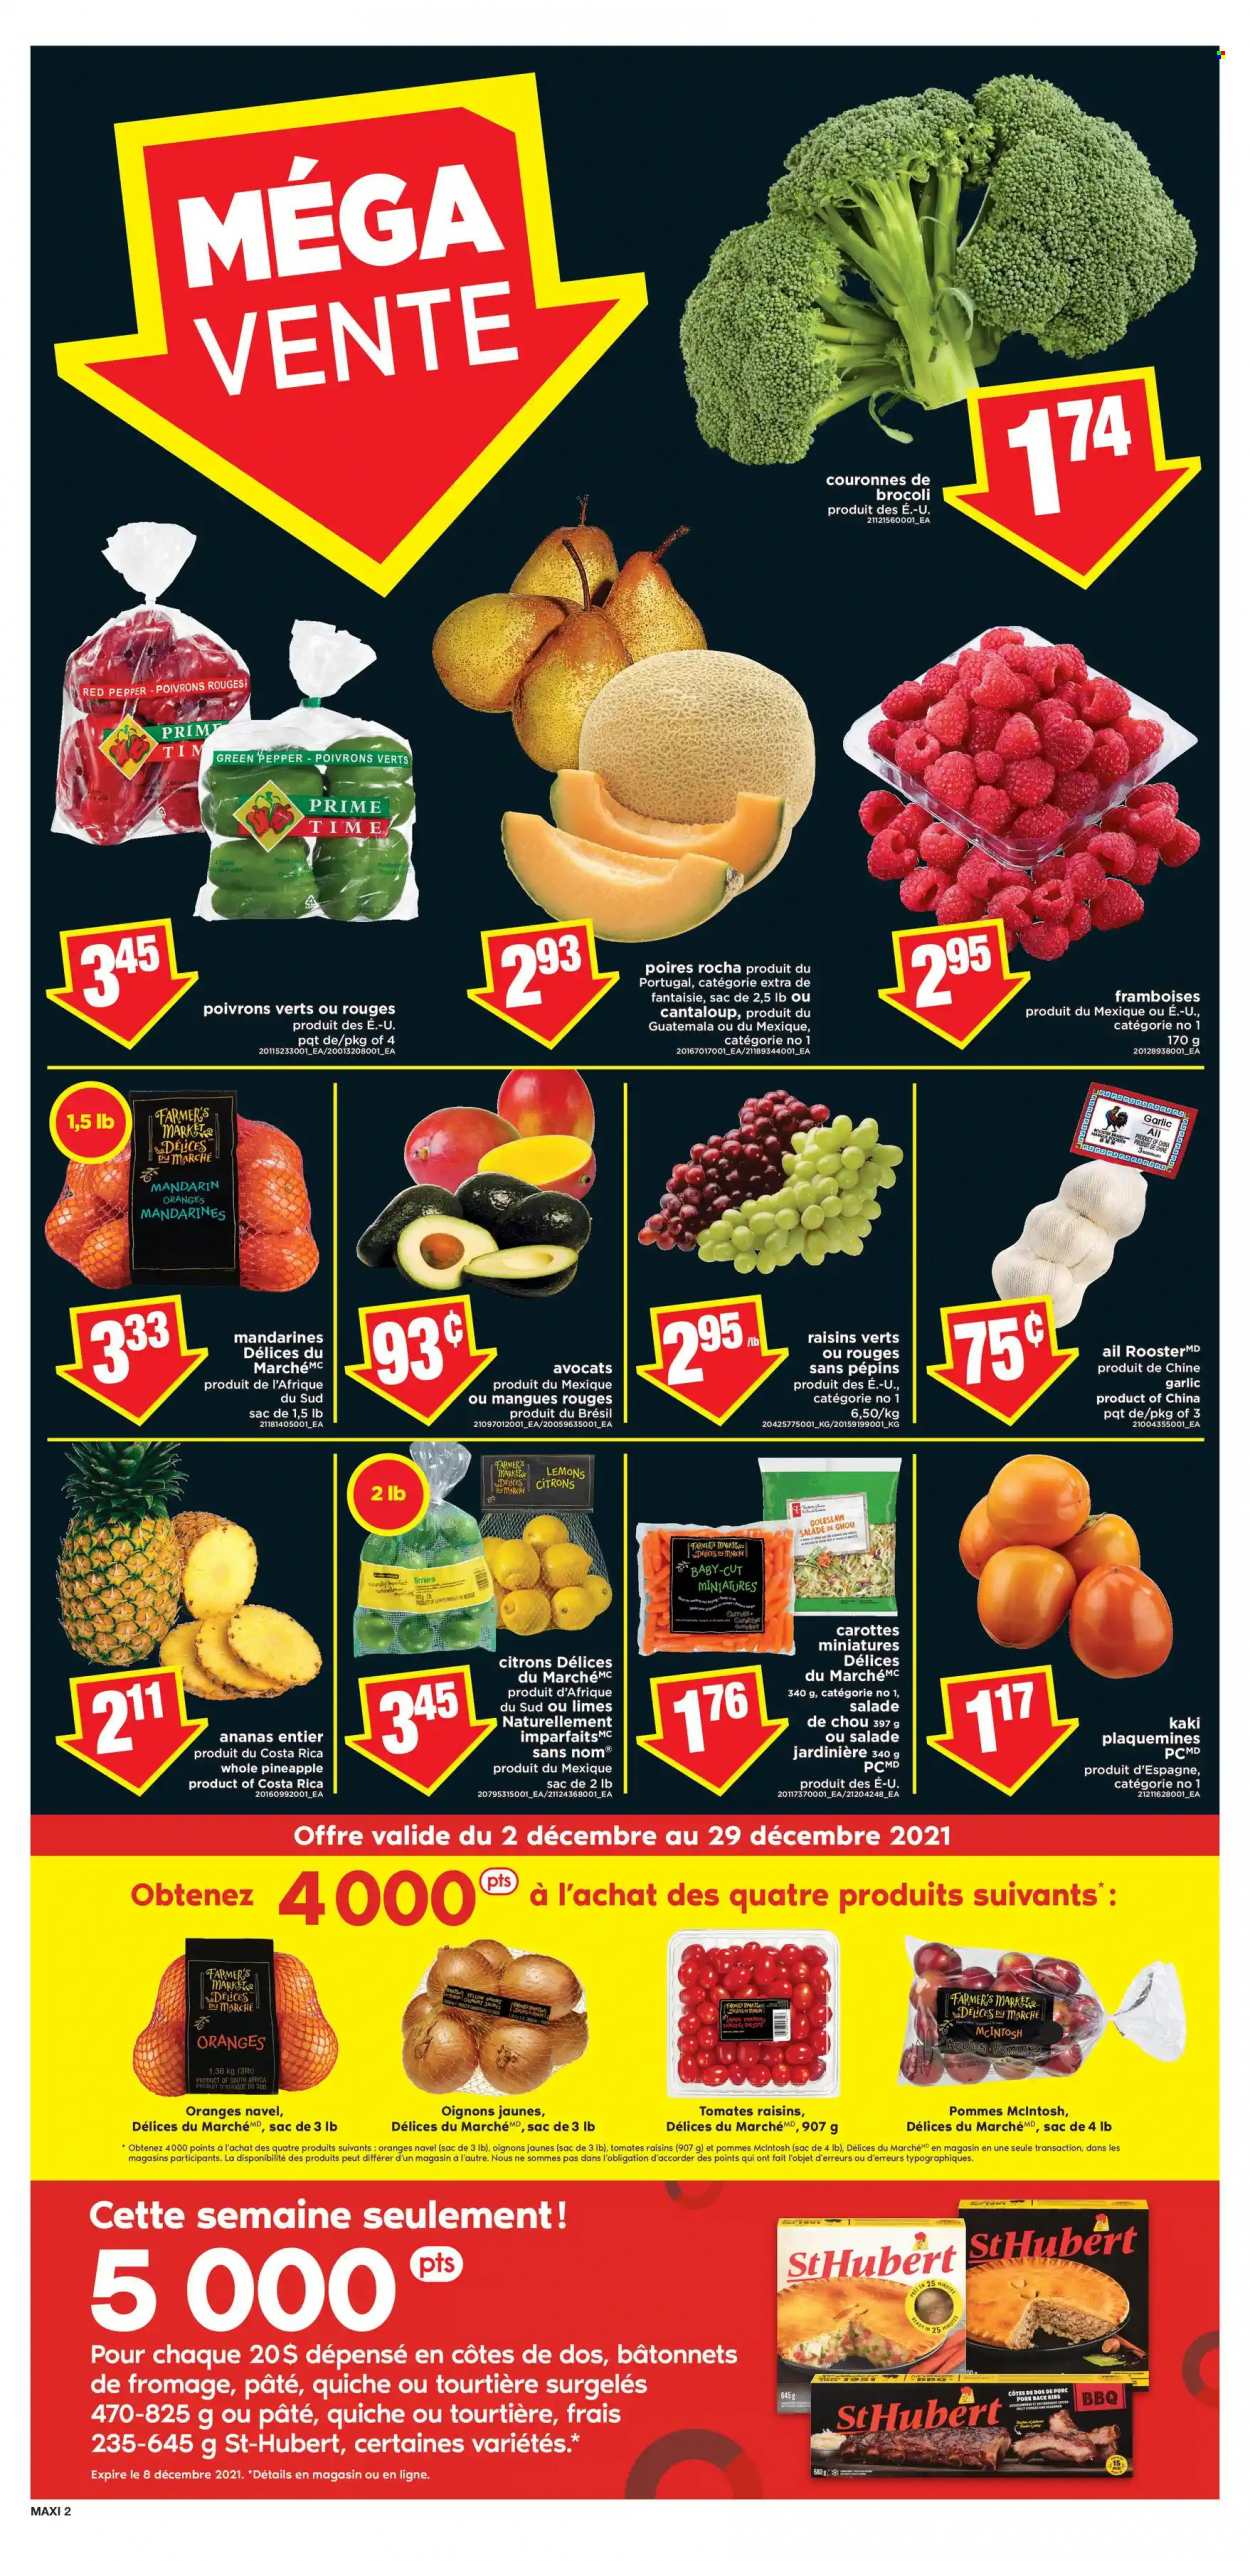 thumbnail - Maxi Flyer - December 02, 2021 - December 08, 2021 - Sales products - garlic, green pepper, limes, mandarines, pineapple, persimmons, lemons, coleslaw, quiche, dried fruit, raisins, oranges. Page 3.